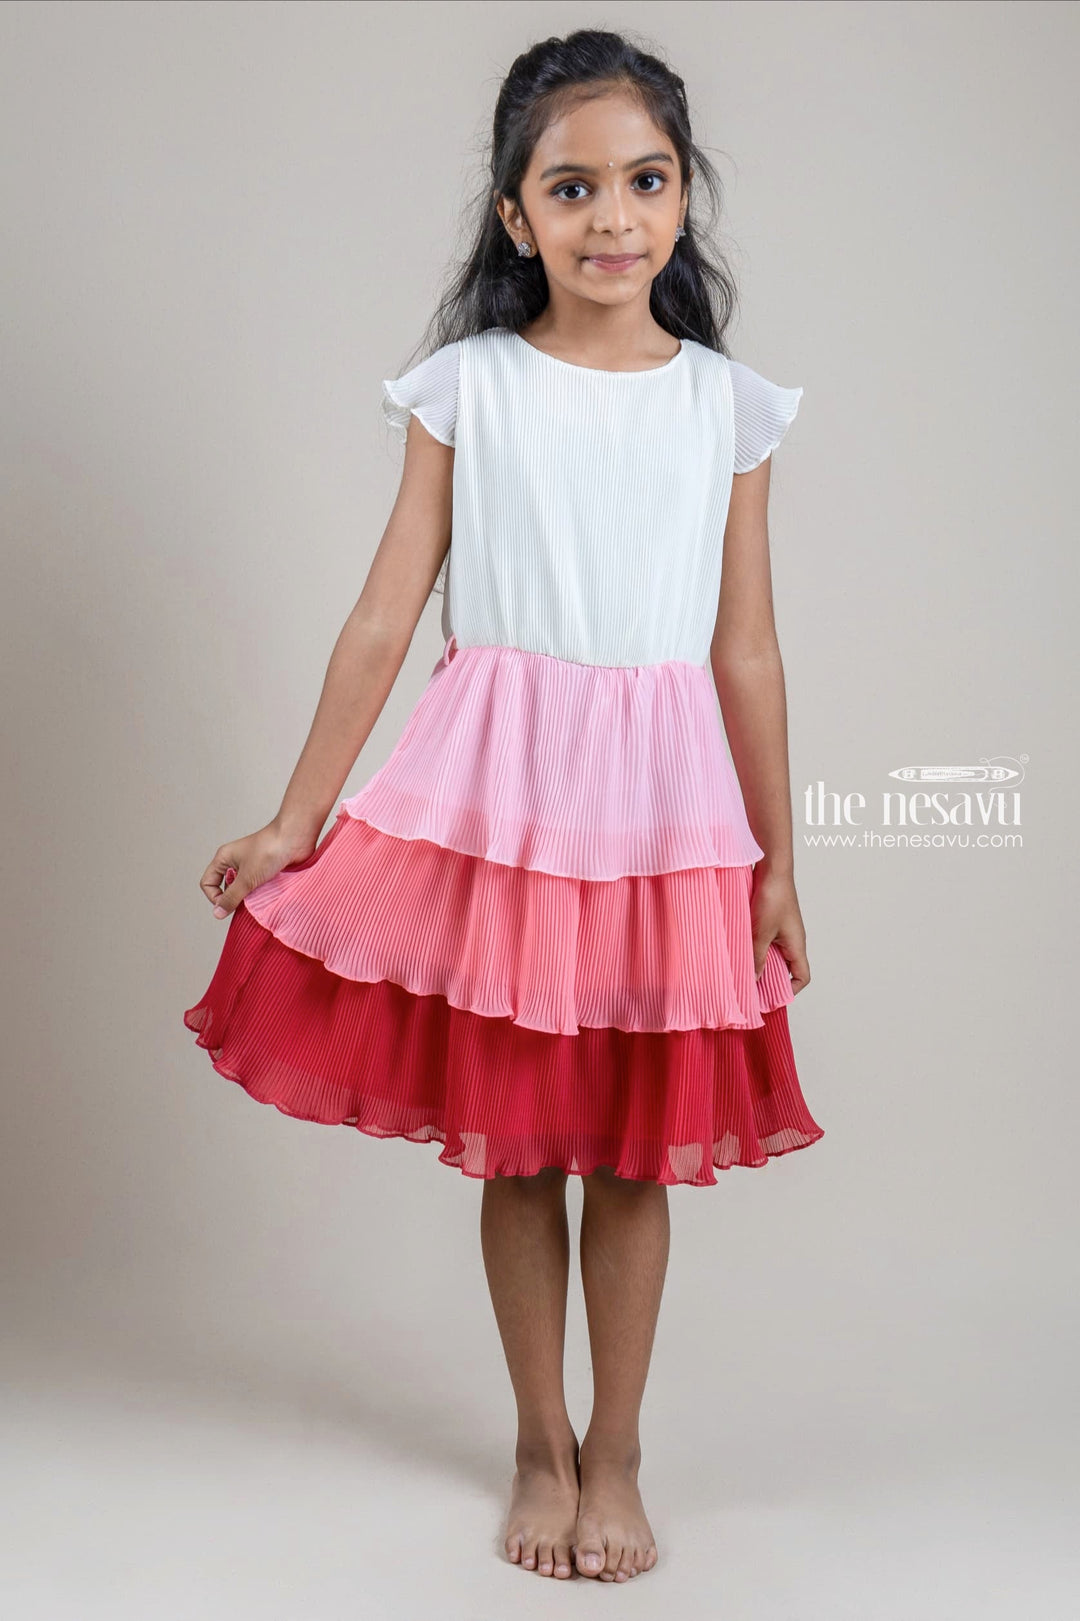 The Nesavu Girls Fancy Frock Dazzling Yellow Yoke and Ombre Dyed Layered Casual Frock for Girls with Hip Belt Nesavu 24 (5Y) / Yellow / Chiffon GFC1059A-24 Dazzling Yellow Yoke and Ombre Dyed Layered Casual Frock with Hip Belt for Girls | Buy Online at The Nesavu